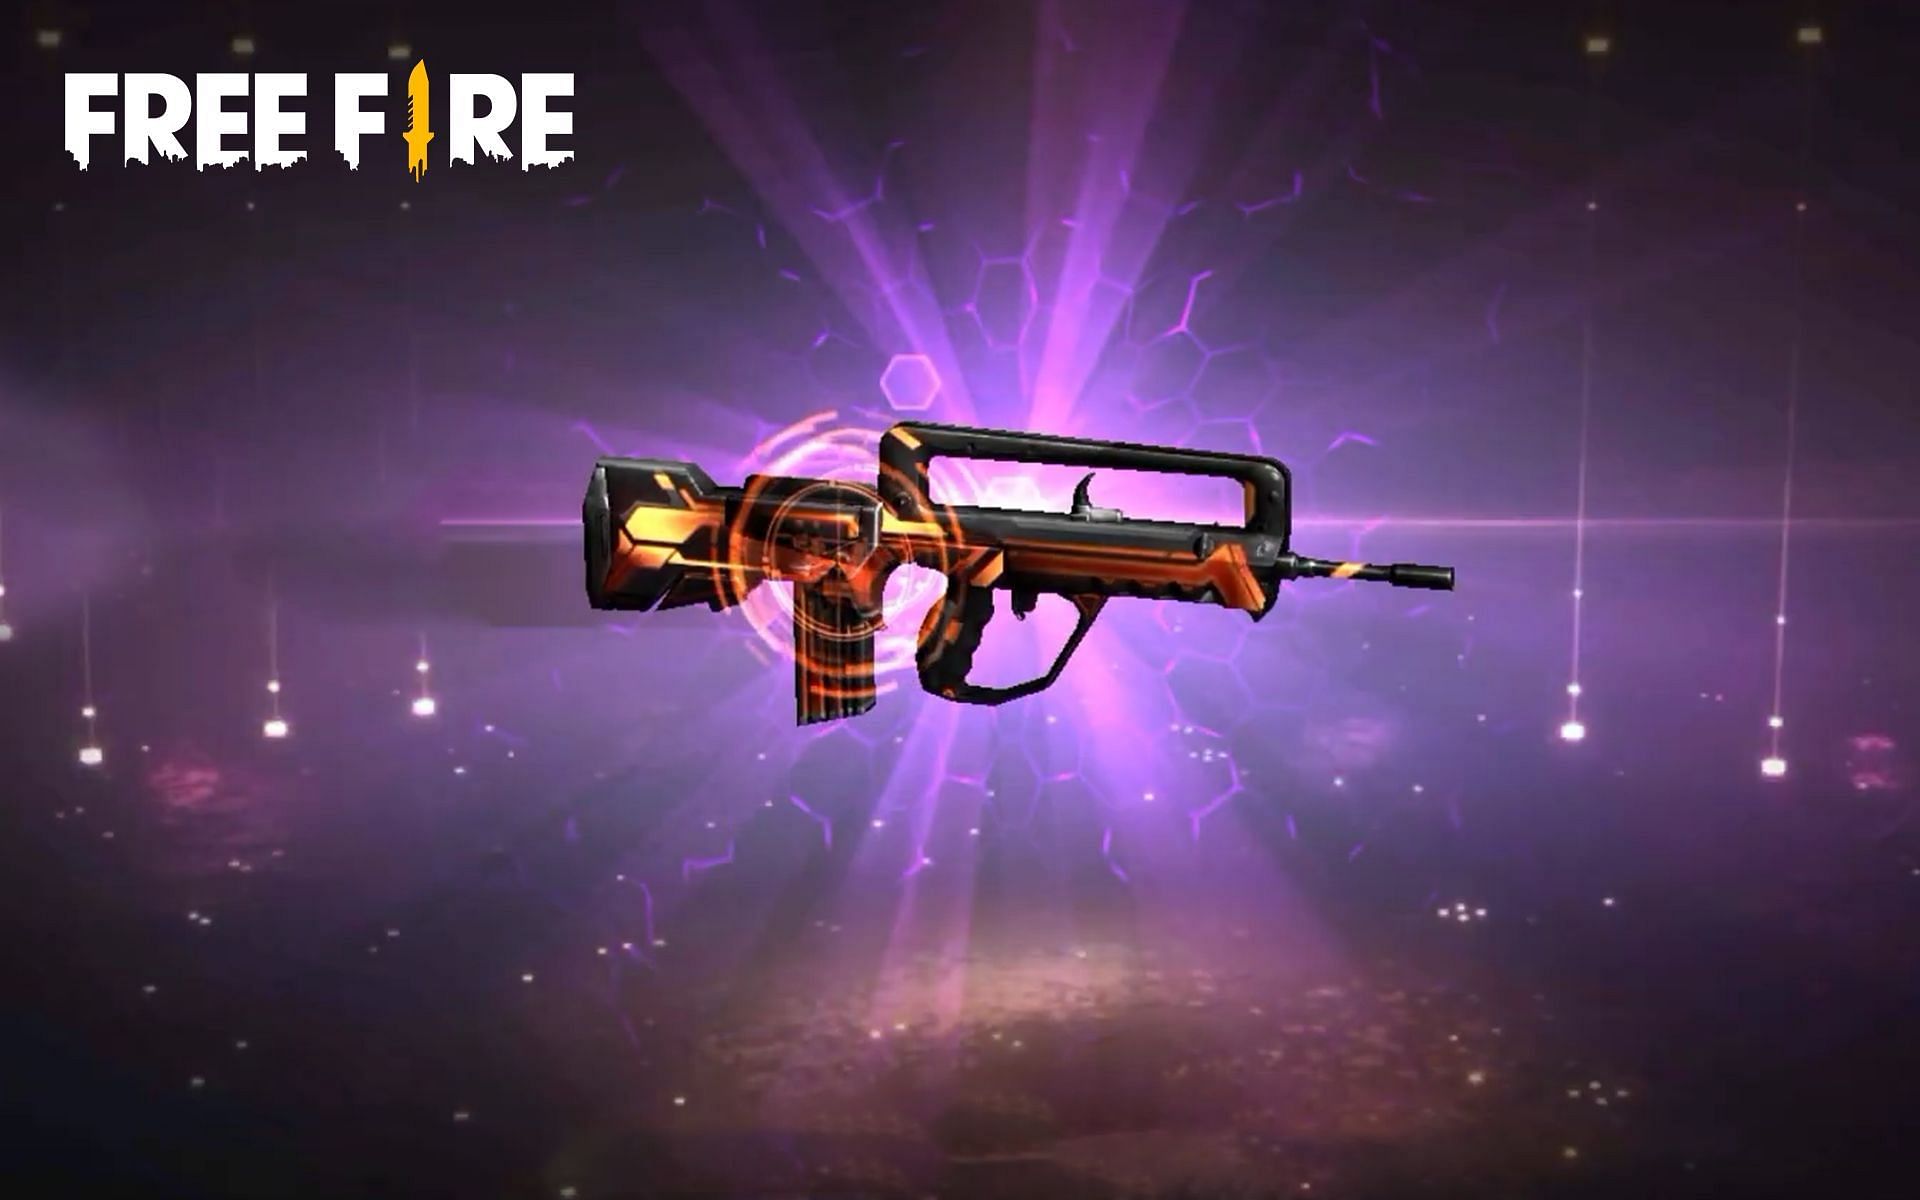 Legendary guns can be availed through the events (Image via Free Fire)